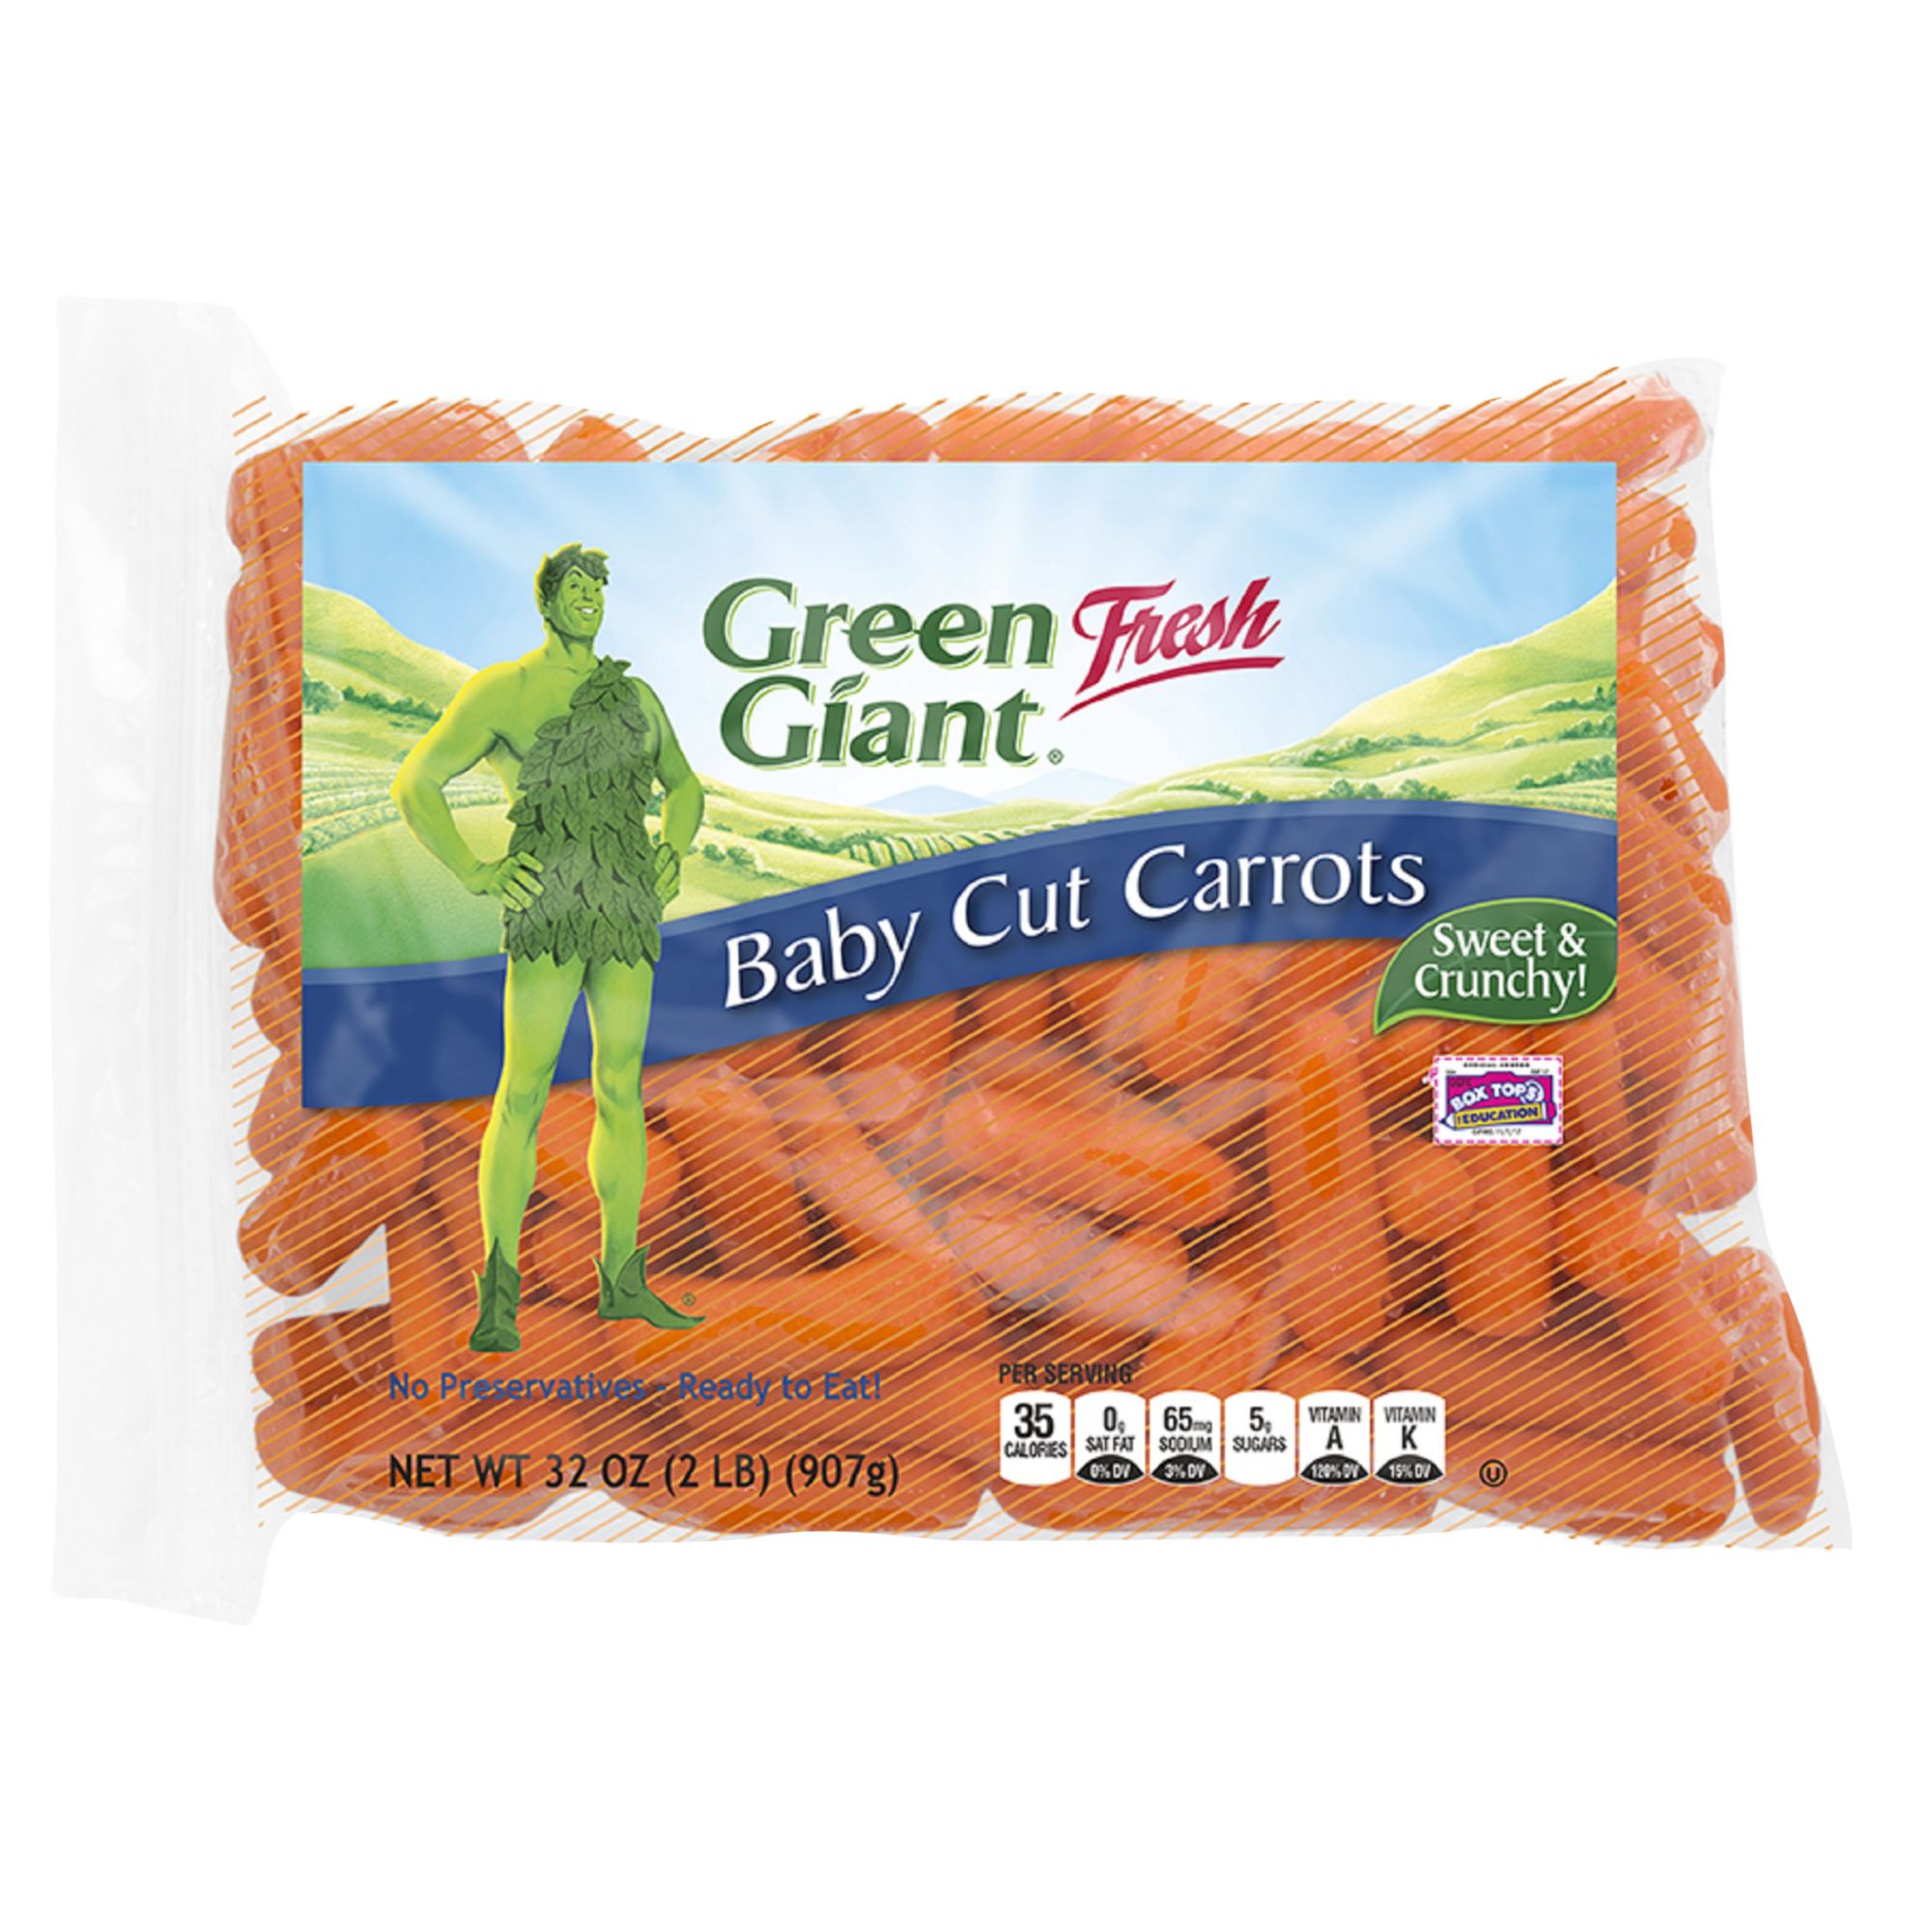 Are Baby Carrots A Healthy Snack Healthy Snacks